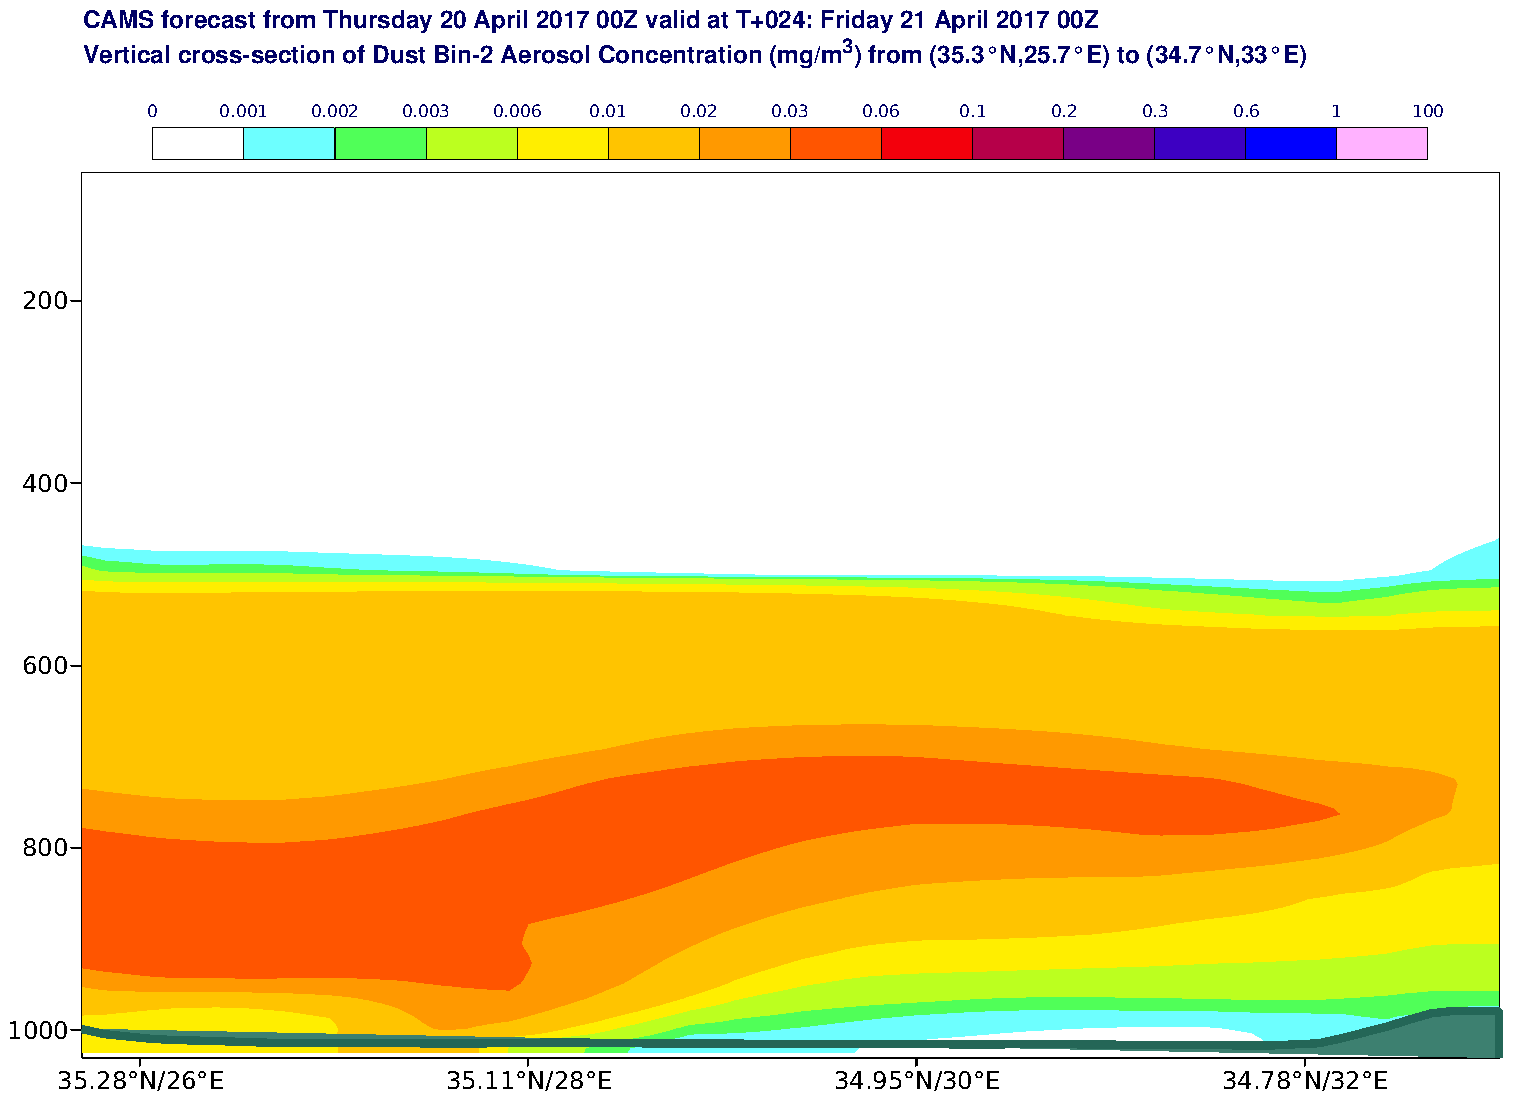 Vertical cross-section of Dust Bin-2 Aerosol Concentration (mg/m3) valid at T24 - 2017-04-21 00:00